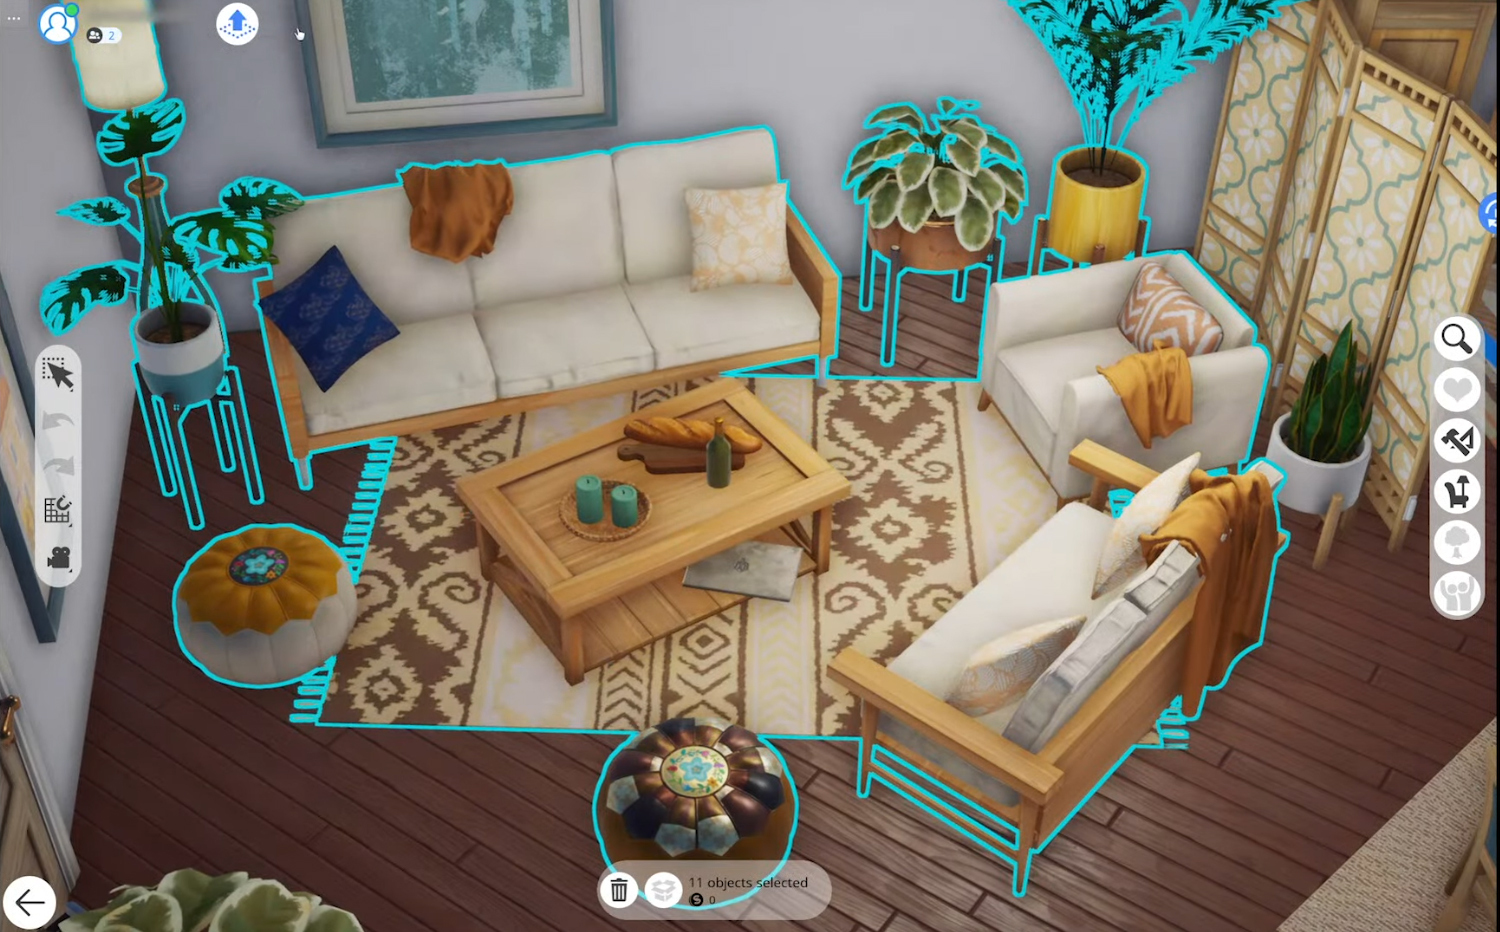 The next Sims game is bringing back my beloved Create-A-Style tool